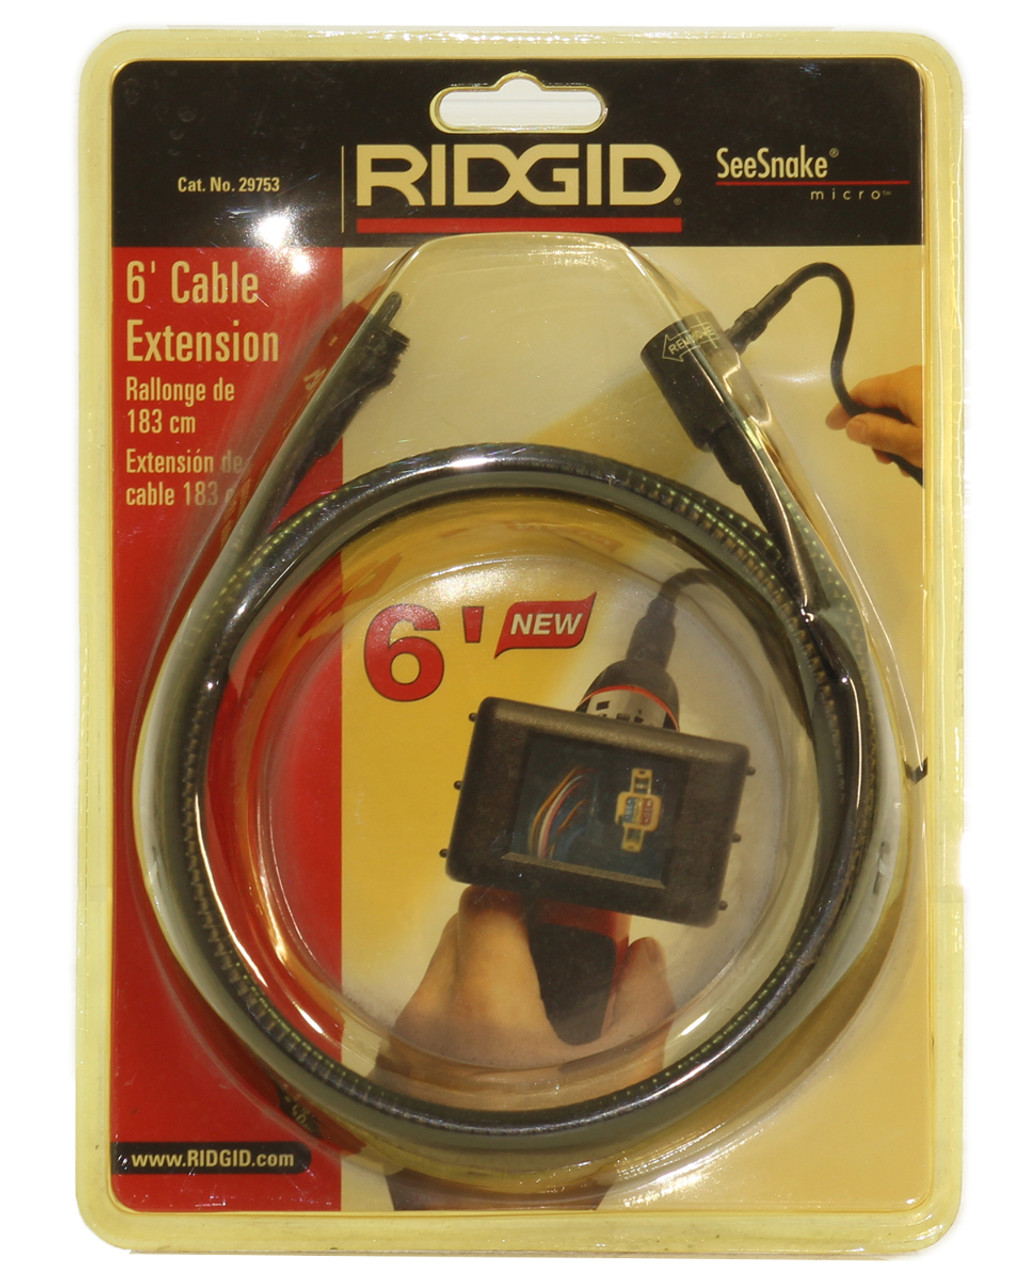 Rigid 29753 Cable Extension